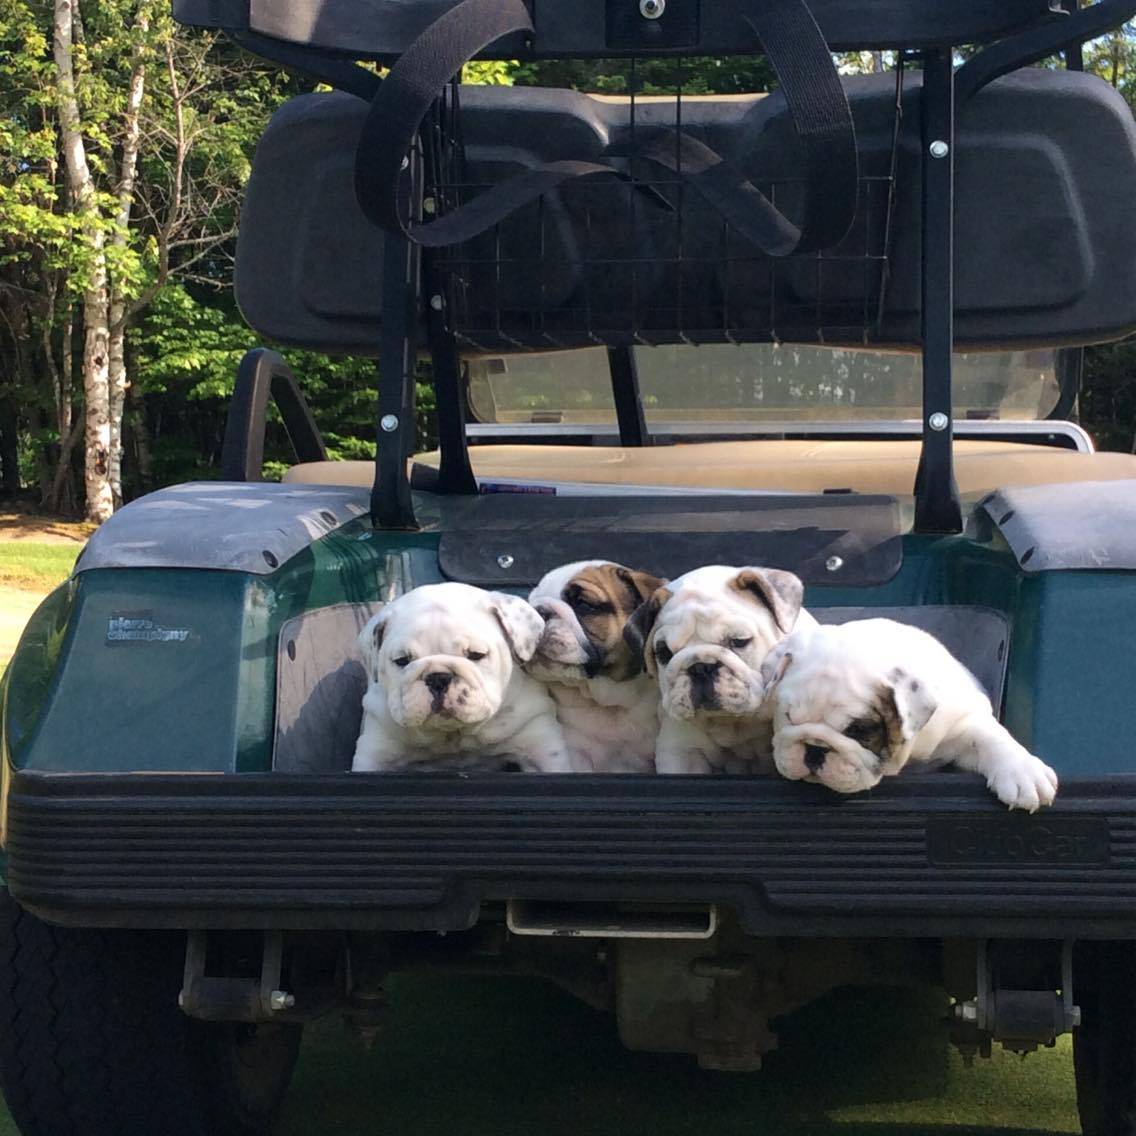 Puppies and golf